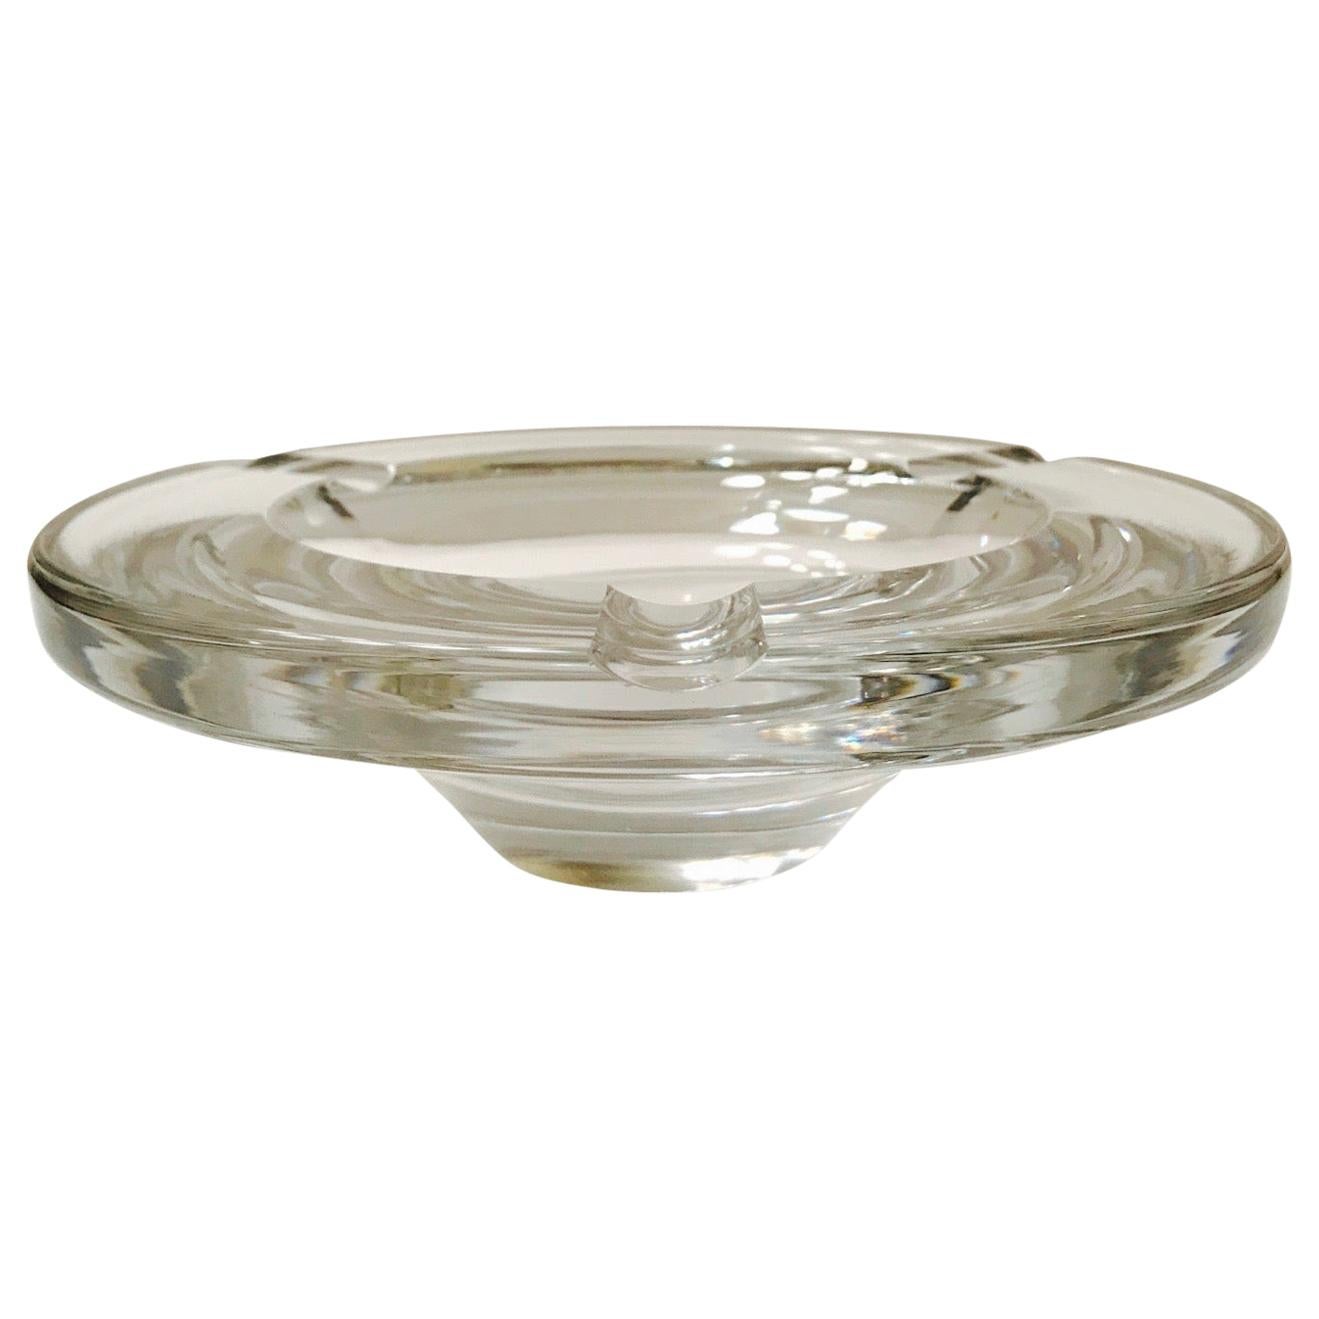 Gorgeous large and heavyweight cigar ashtray or decorative bowl in hand blown crystal. Ashtray has tapered streamline modernist design. Series # 71577. Signed Lindstrand for Kosta Boda.